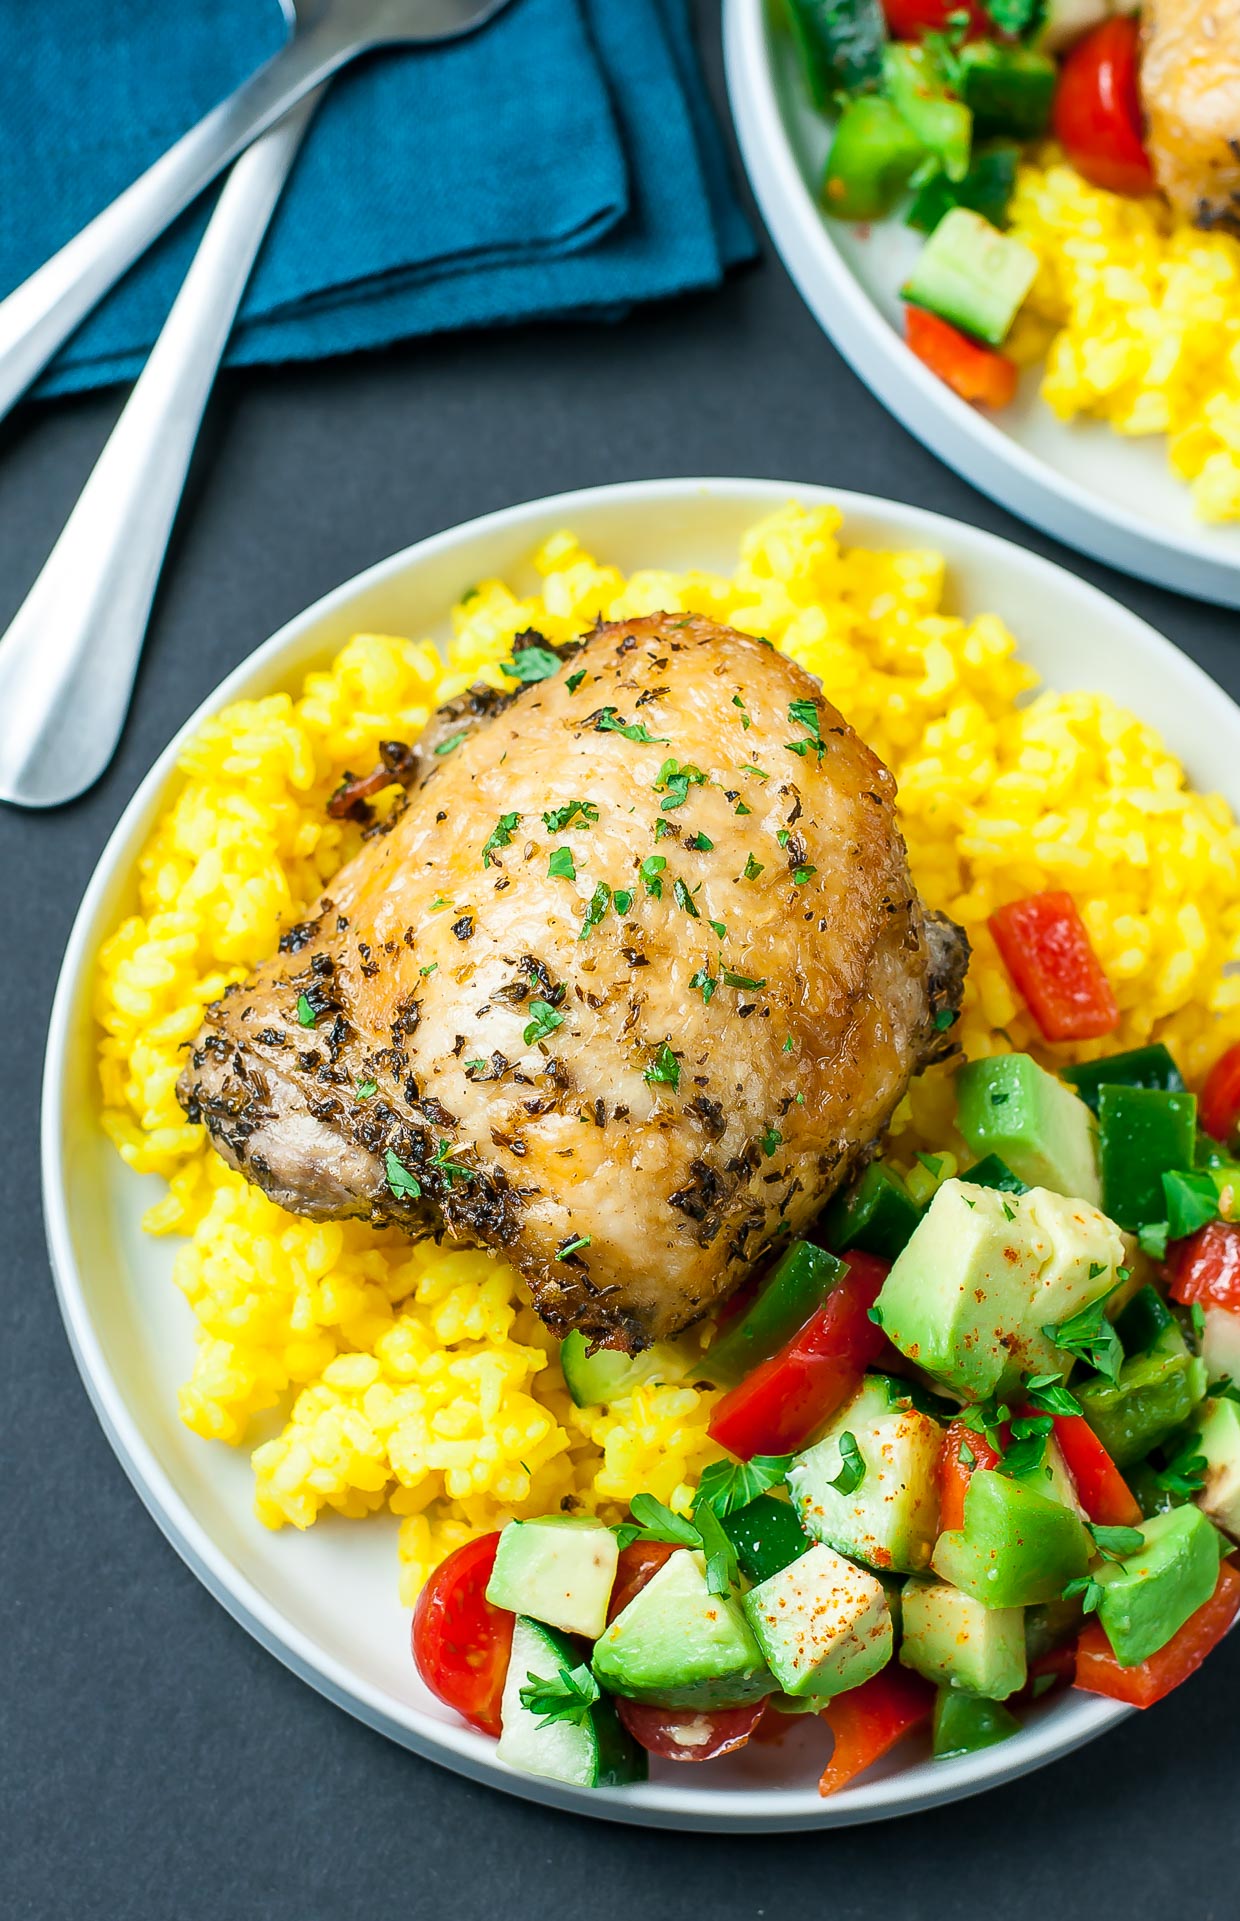 Baked to crispy perfection, these tender chicken thighs are seasoned with a homemade Mediterranean marinade and served with vibrant garlic turmeric rice. This simple weeknight dinner is easy to throw together and full of flavor!